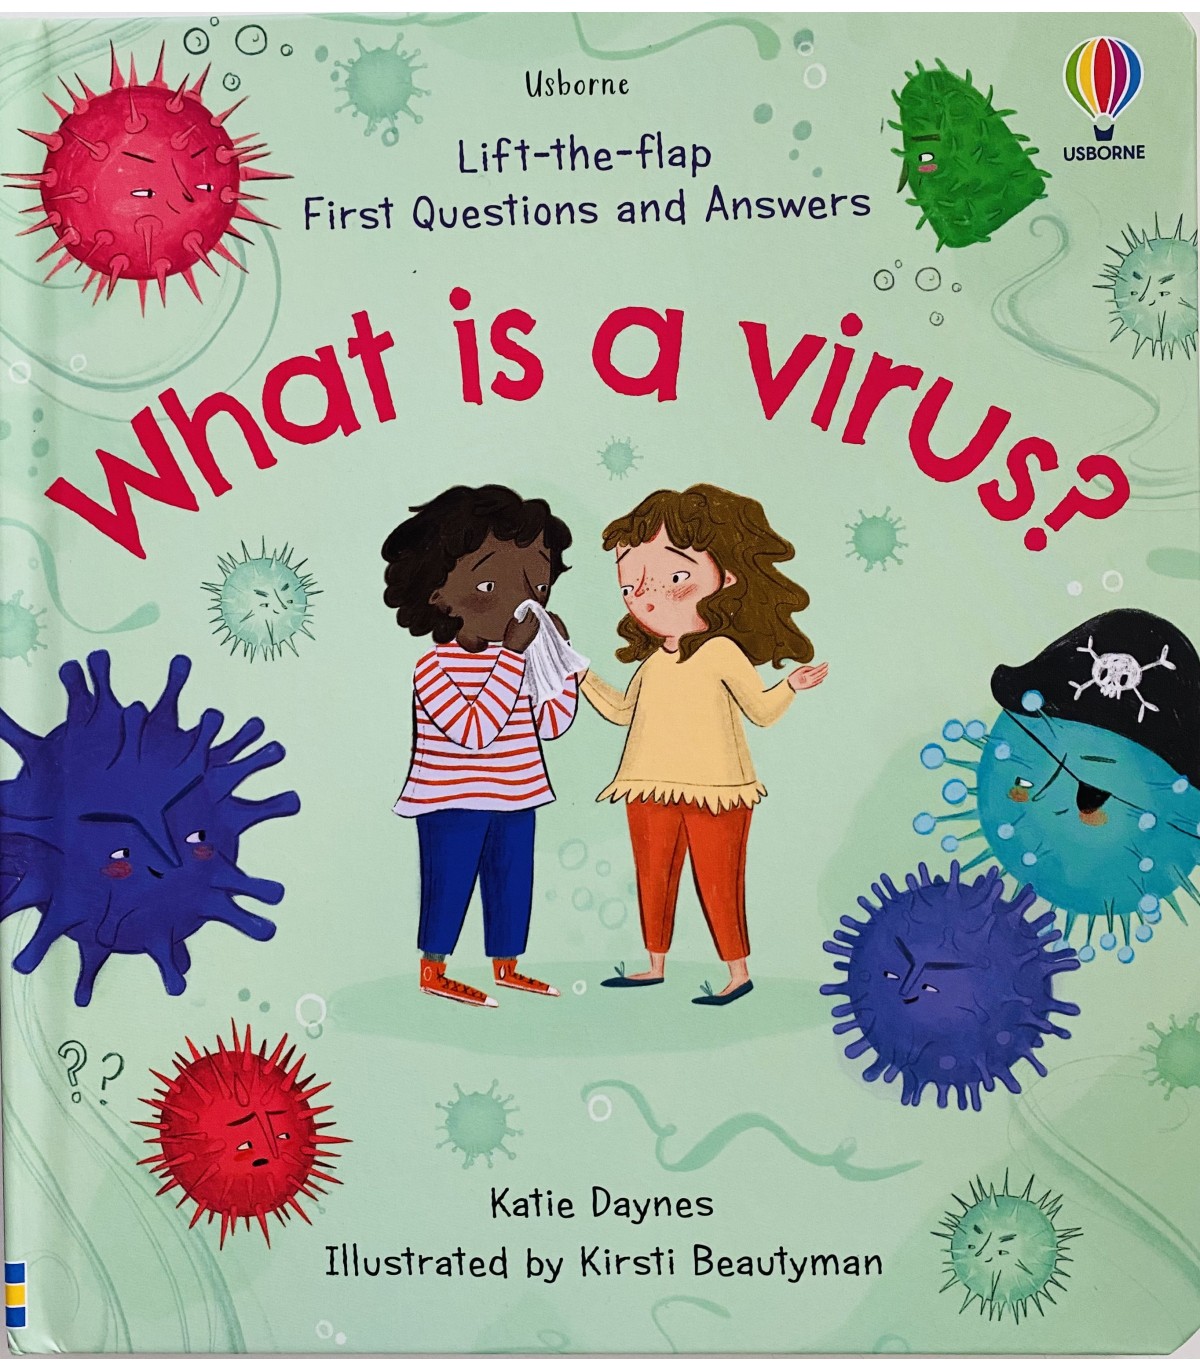 FIRST QUESTIONS AND ANSWERS - WHAT IS A VIRUS?